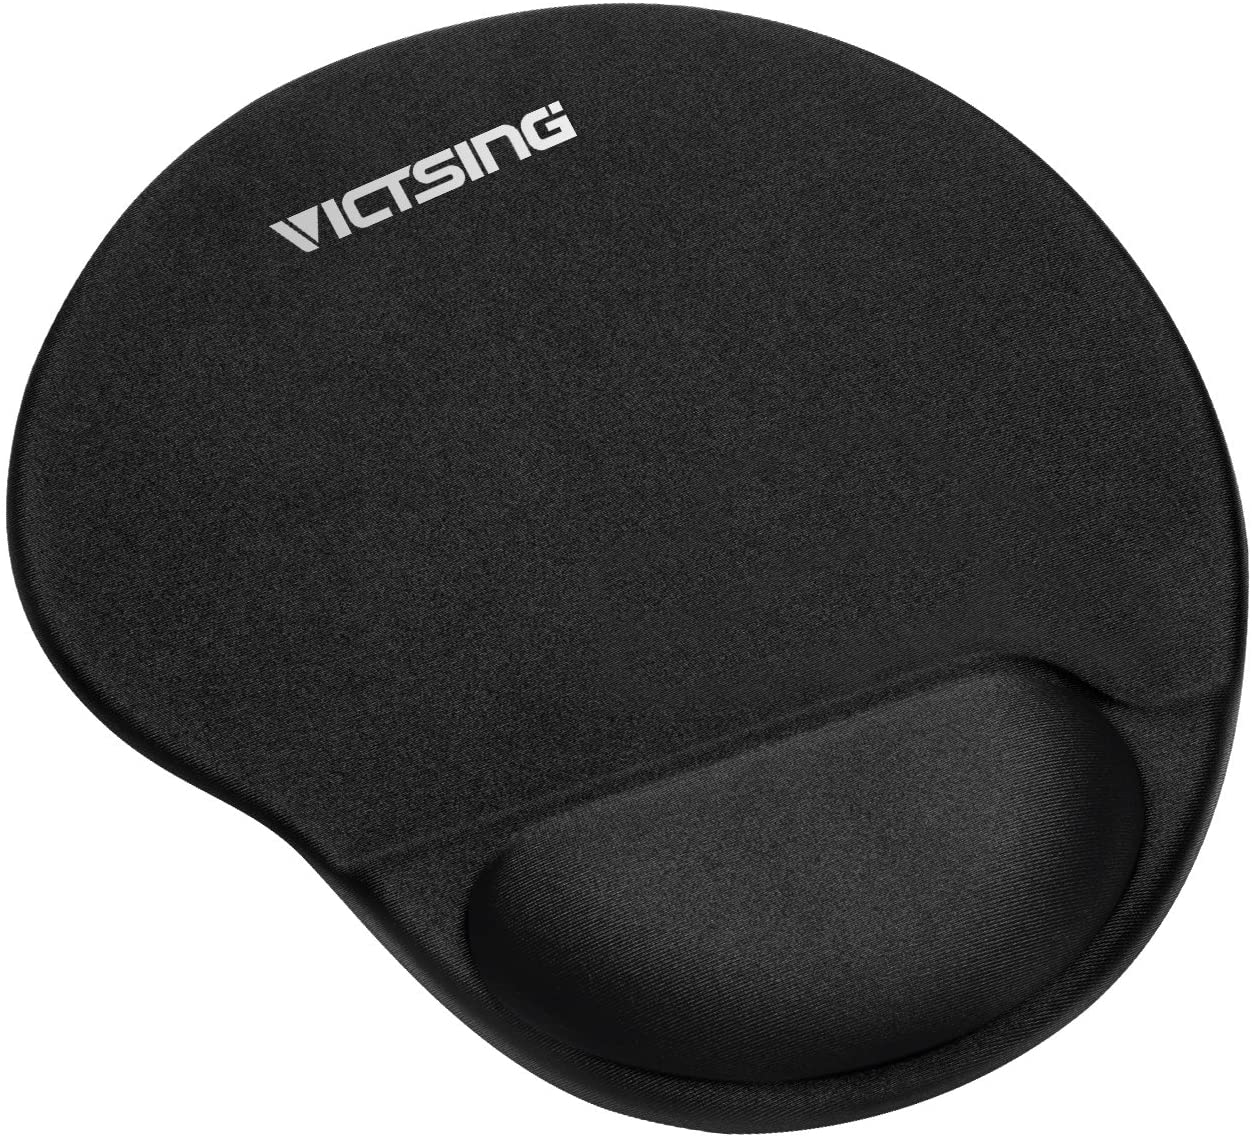 Ergonomic Mouse Pad with Gel Wrist Rest Support by VicTsing